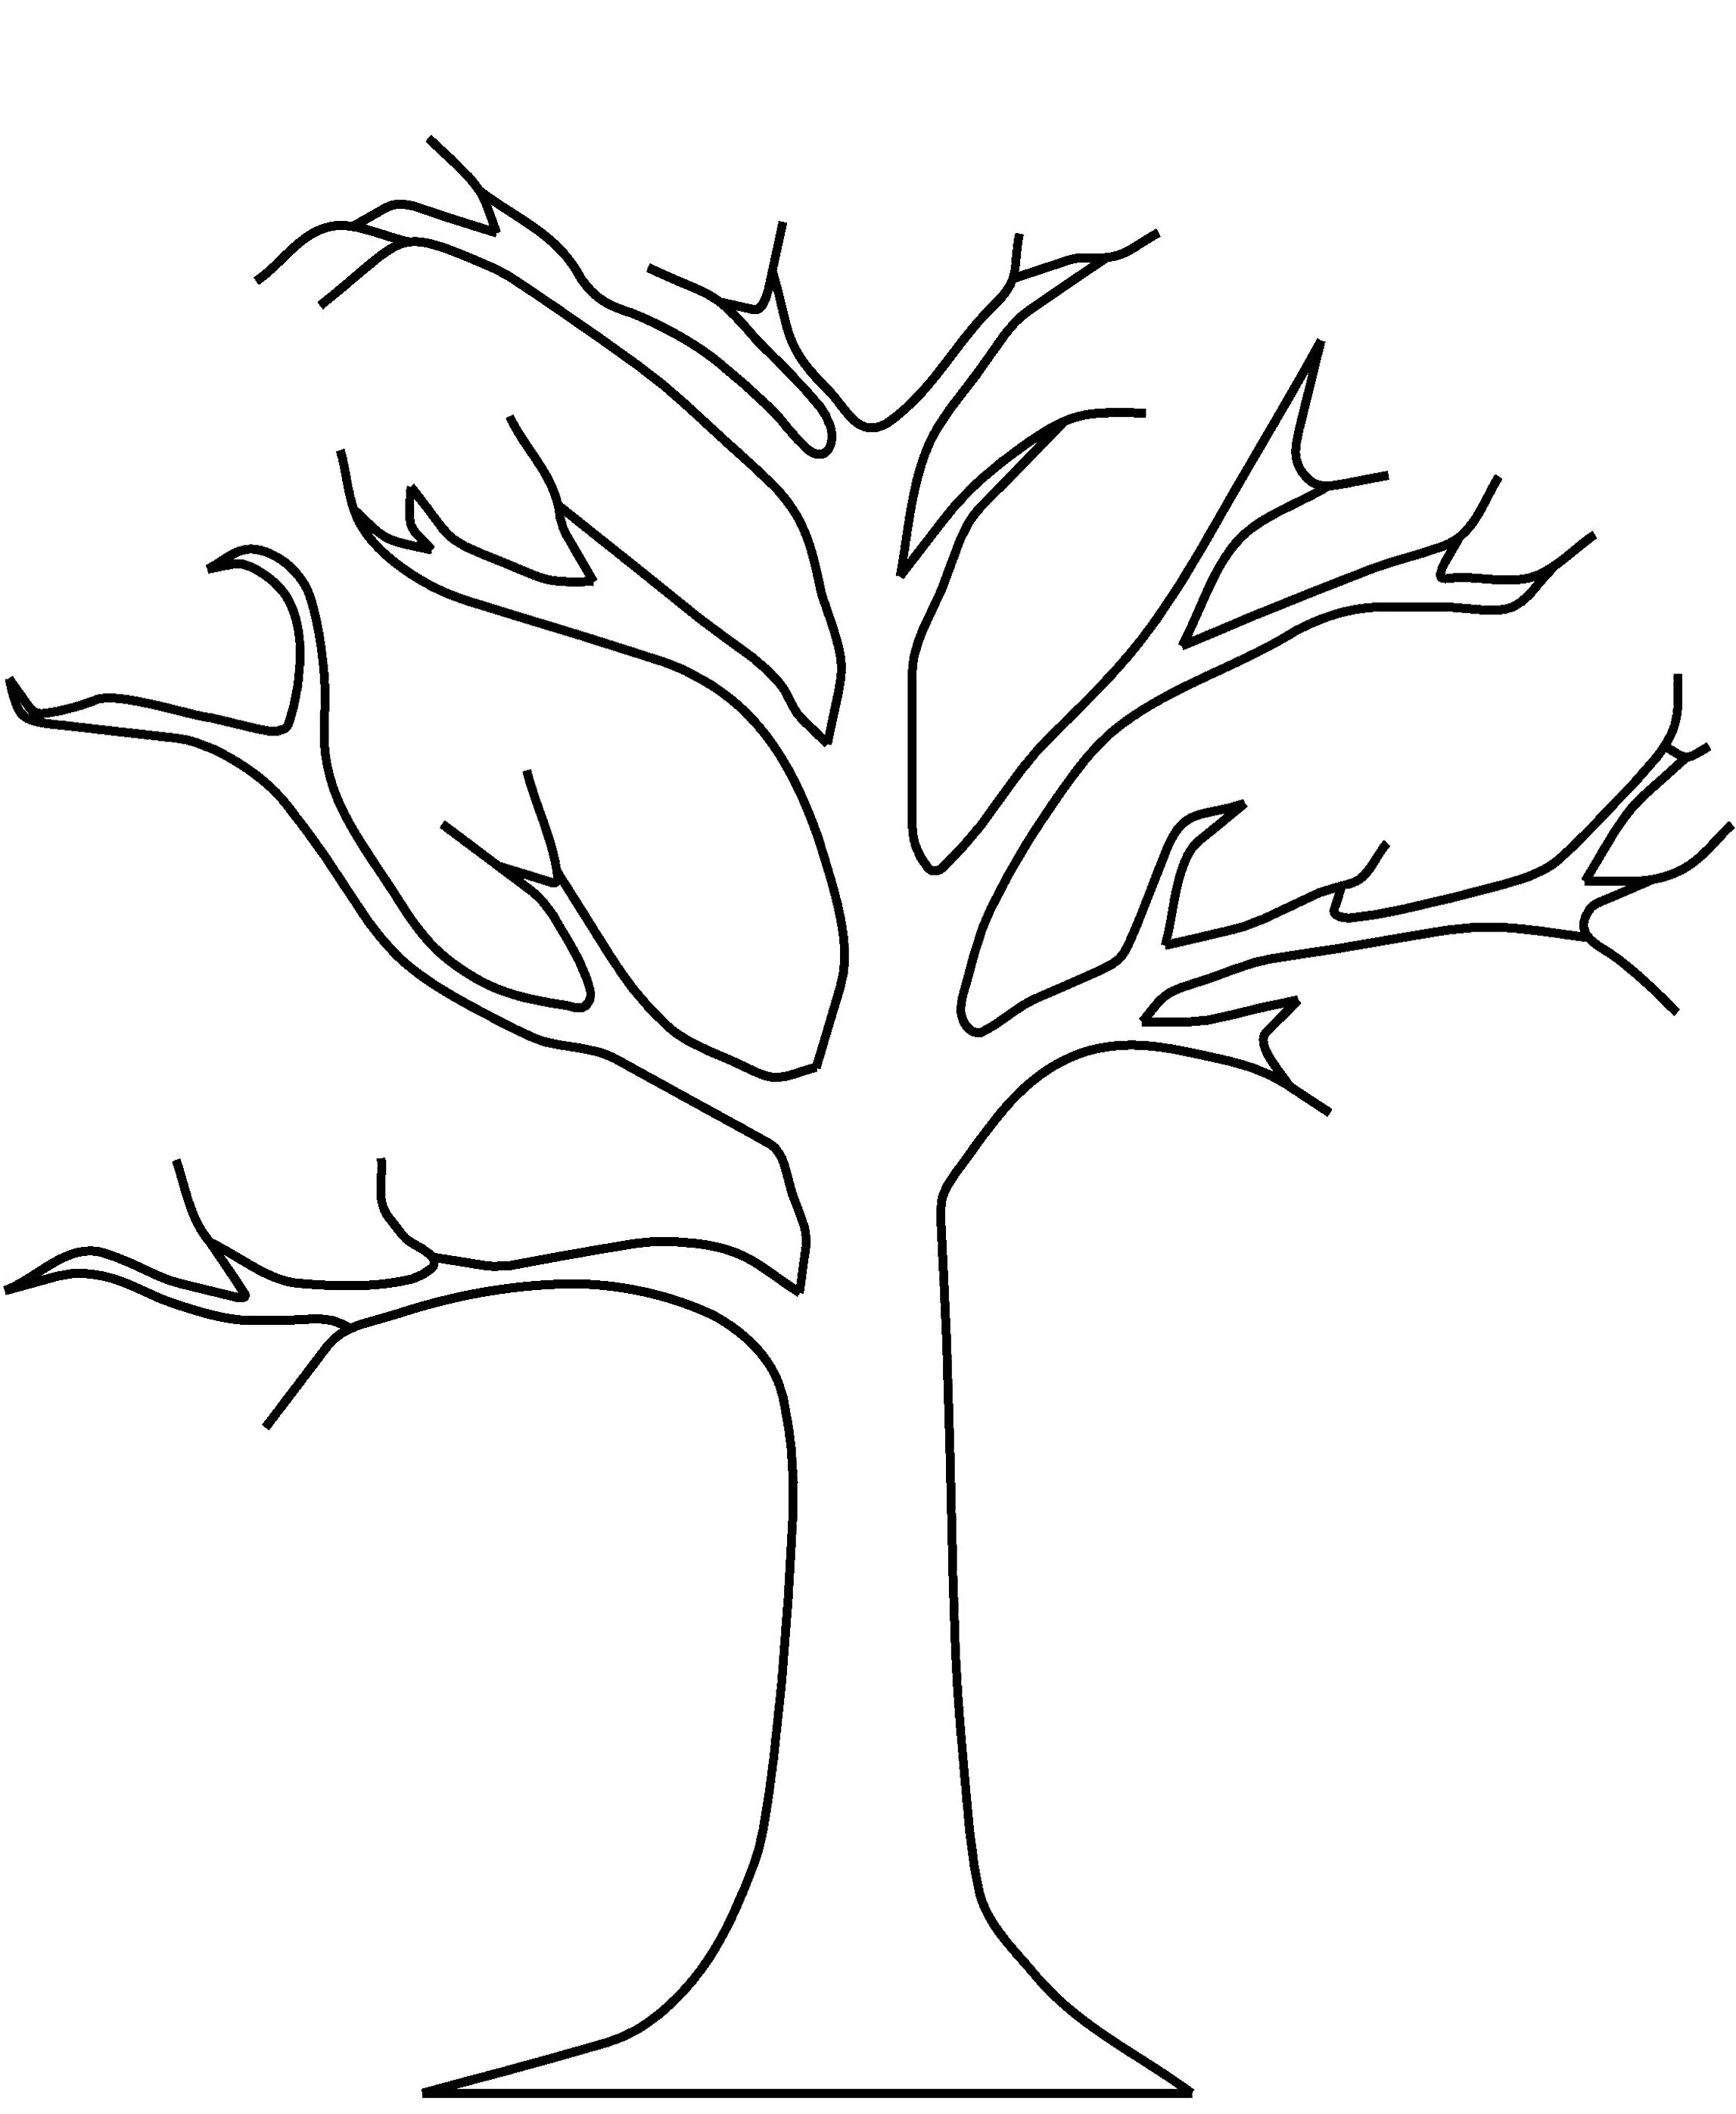 Tree without leaves outline #17